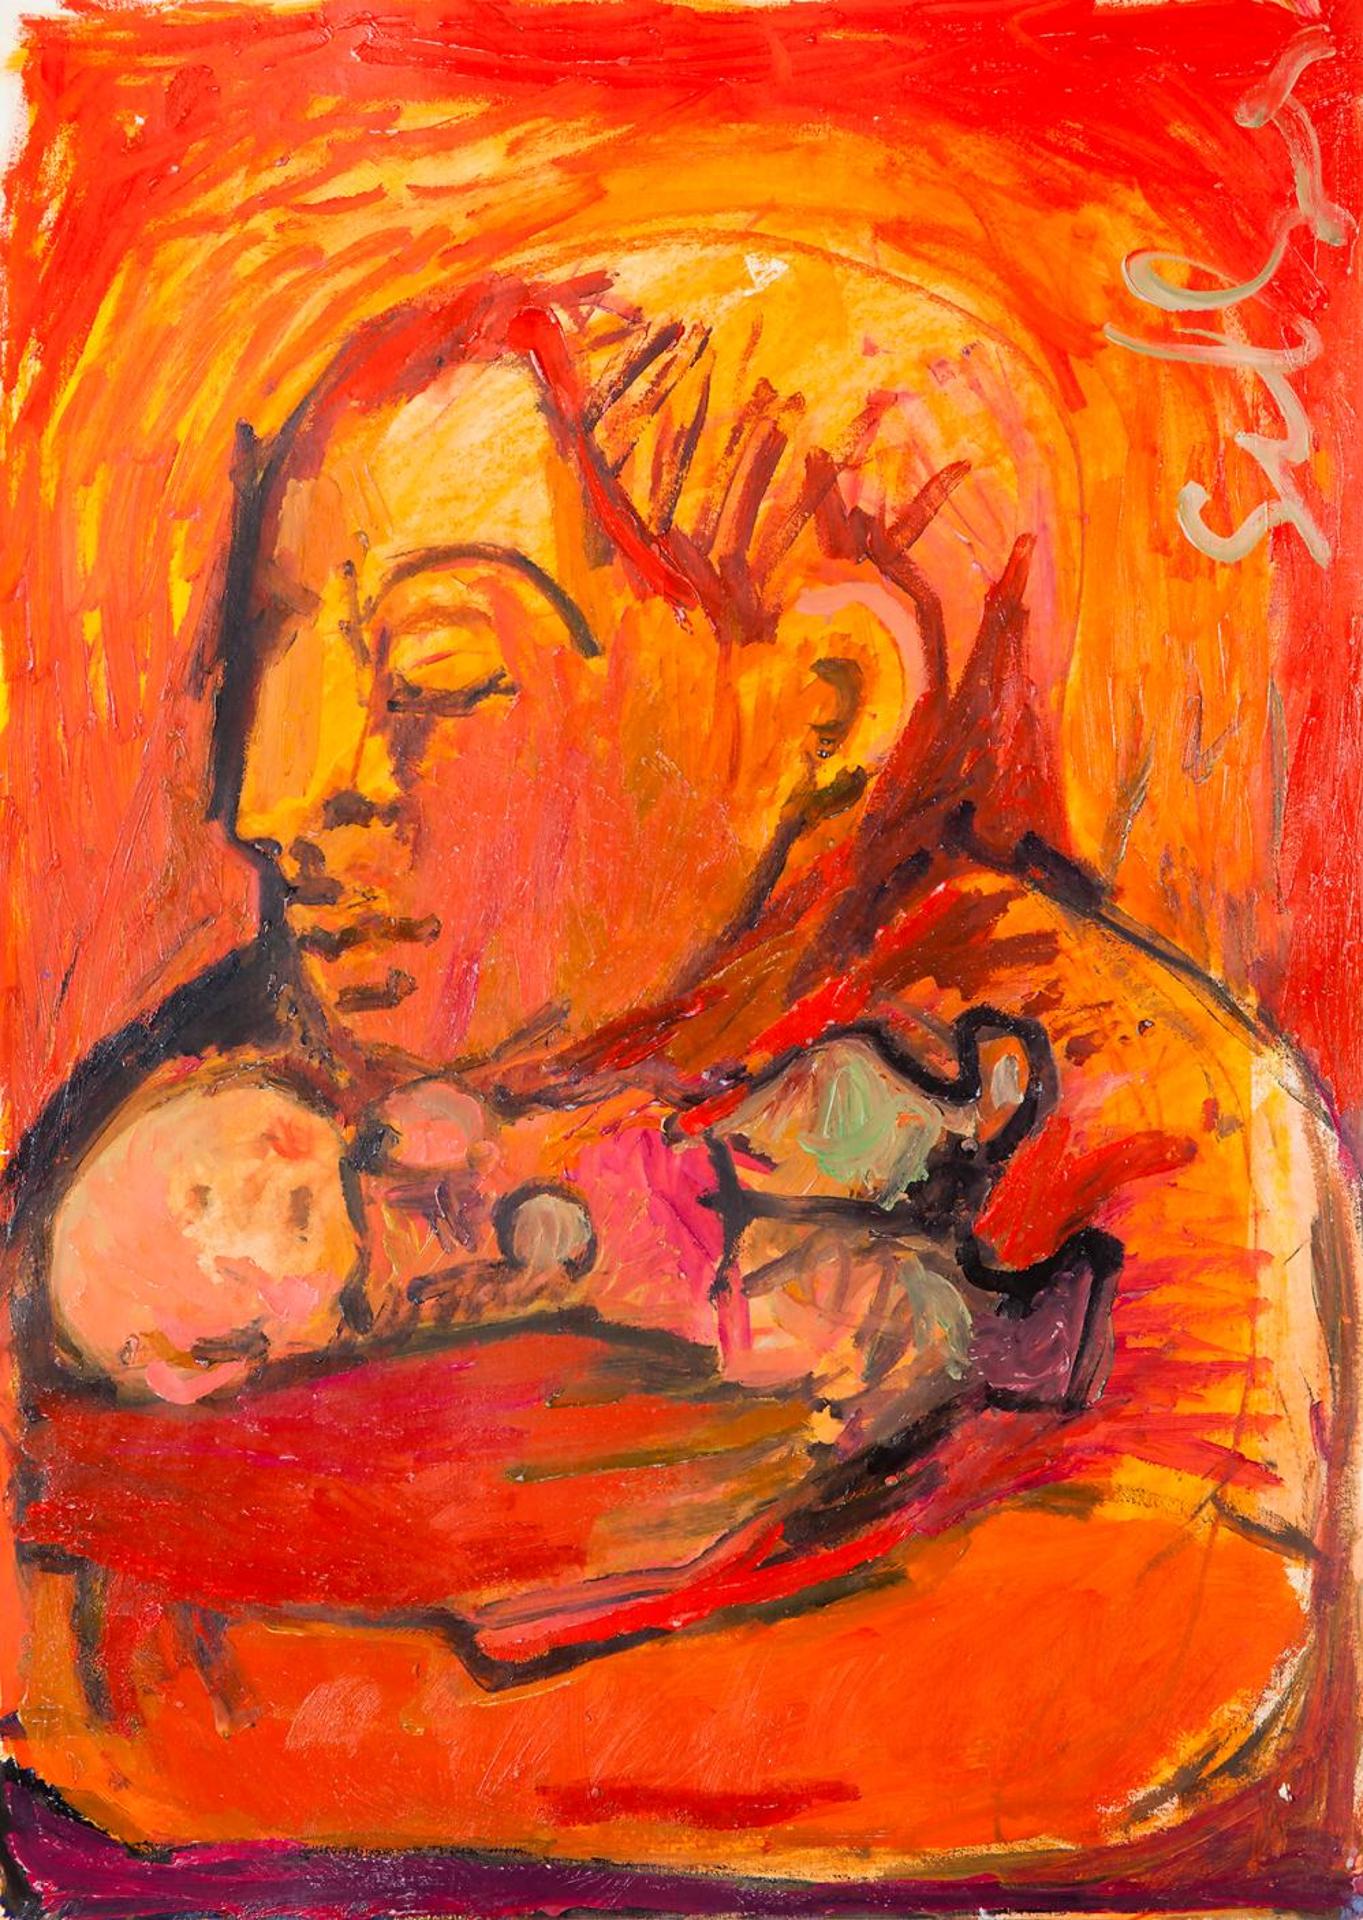 Soozi Schlanger (1953) - Untitled - Woman and Child